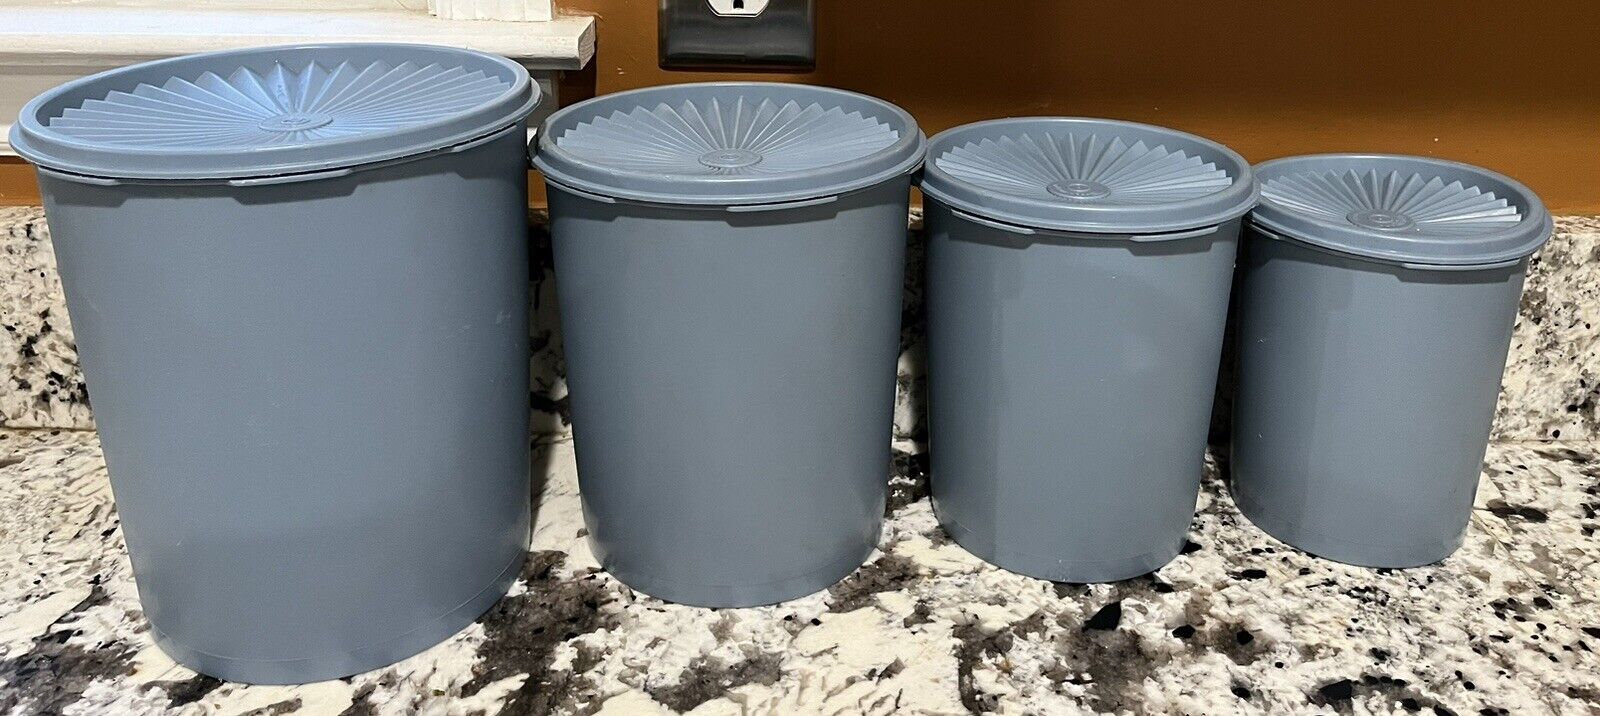 Vintage Tupperware Country Blue Servalier Set of 4 Nesting Canisters with Lids